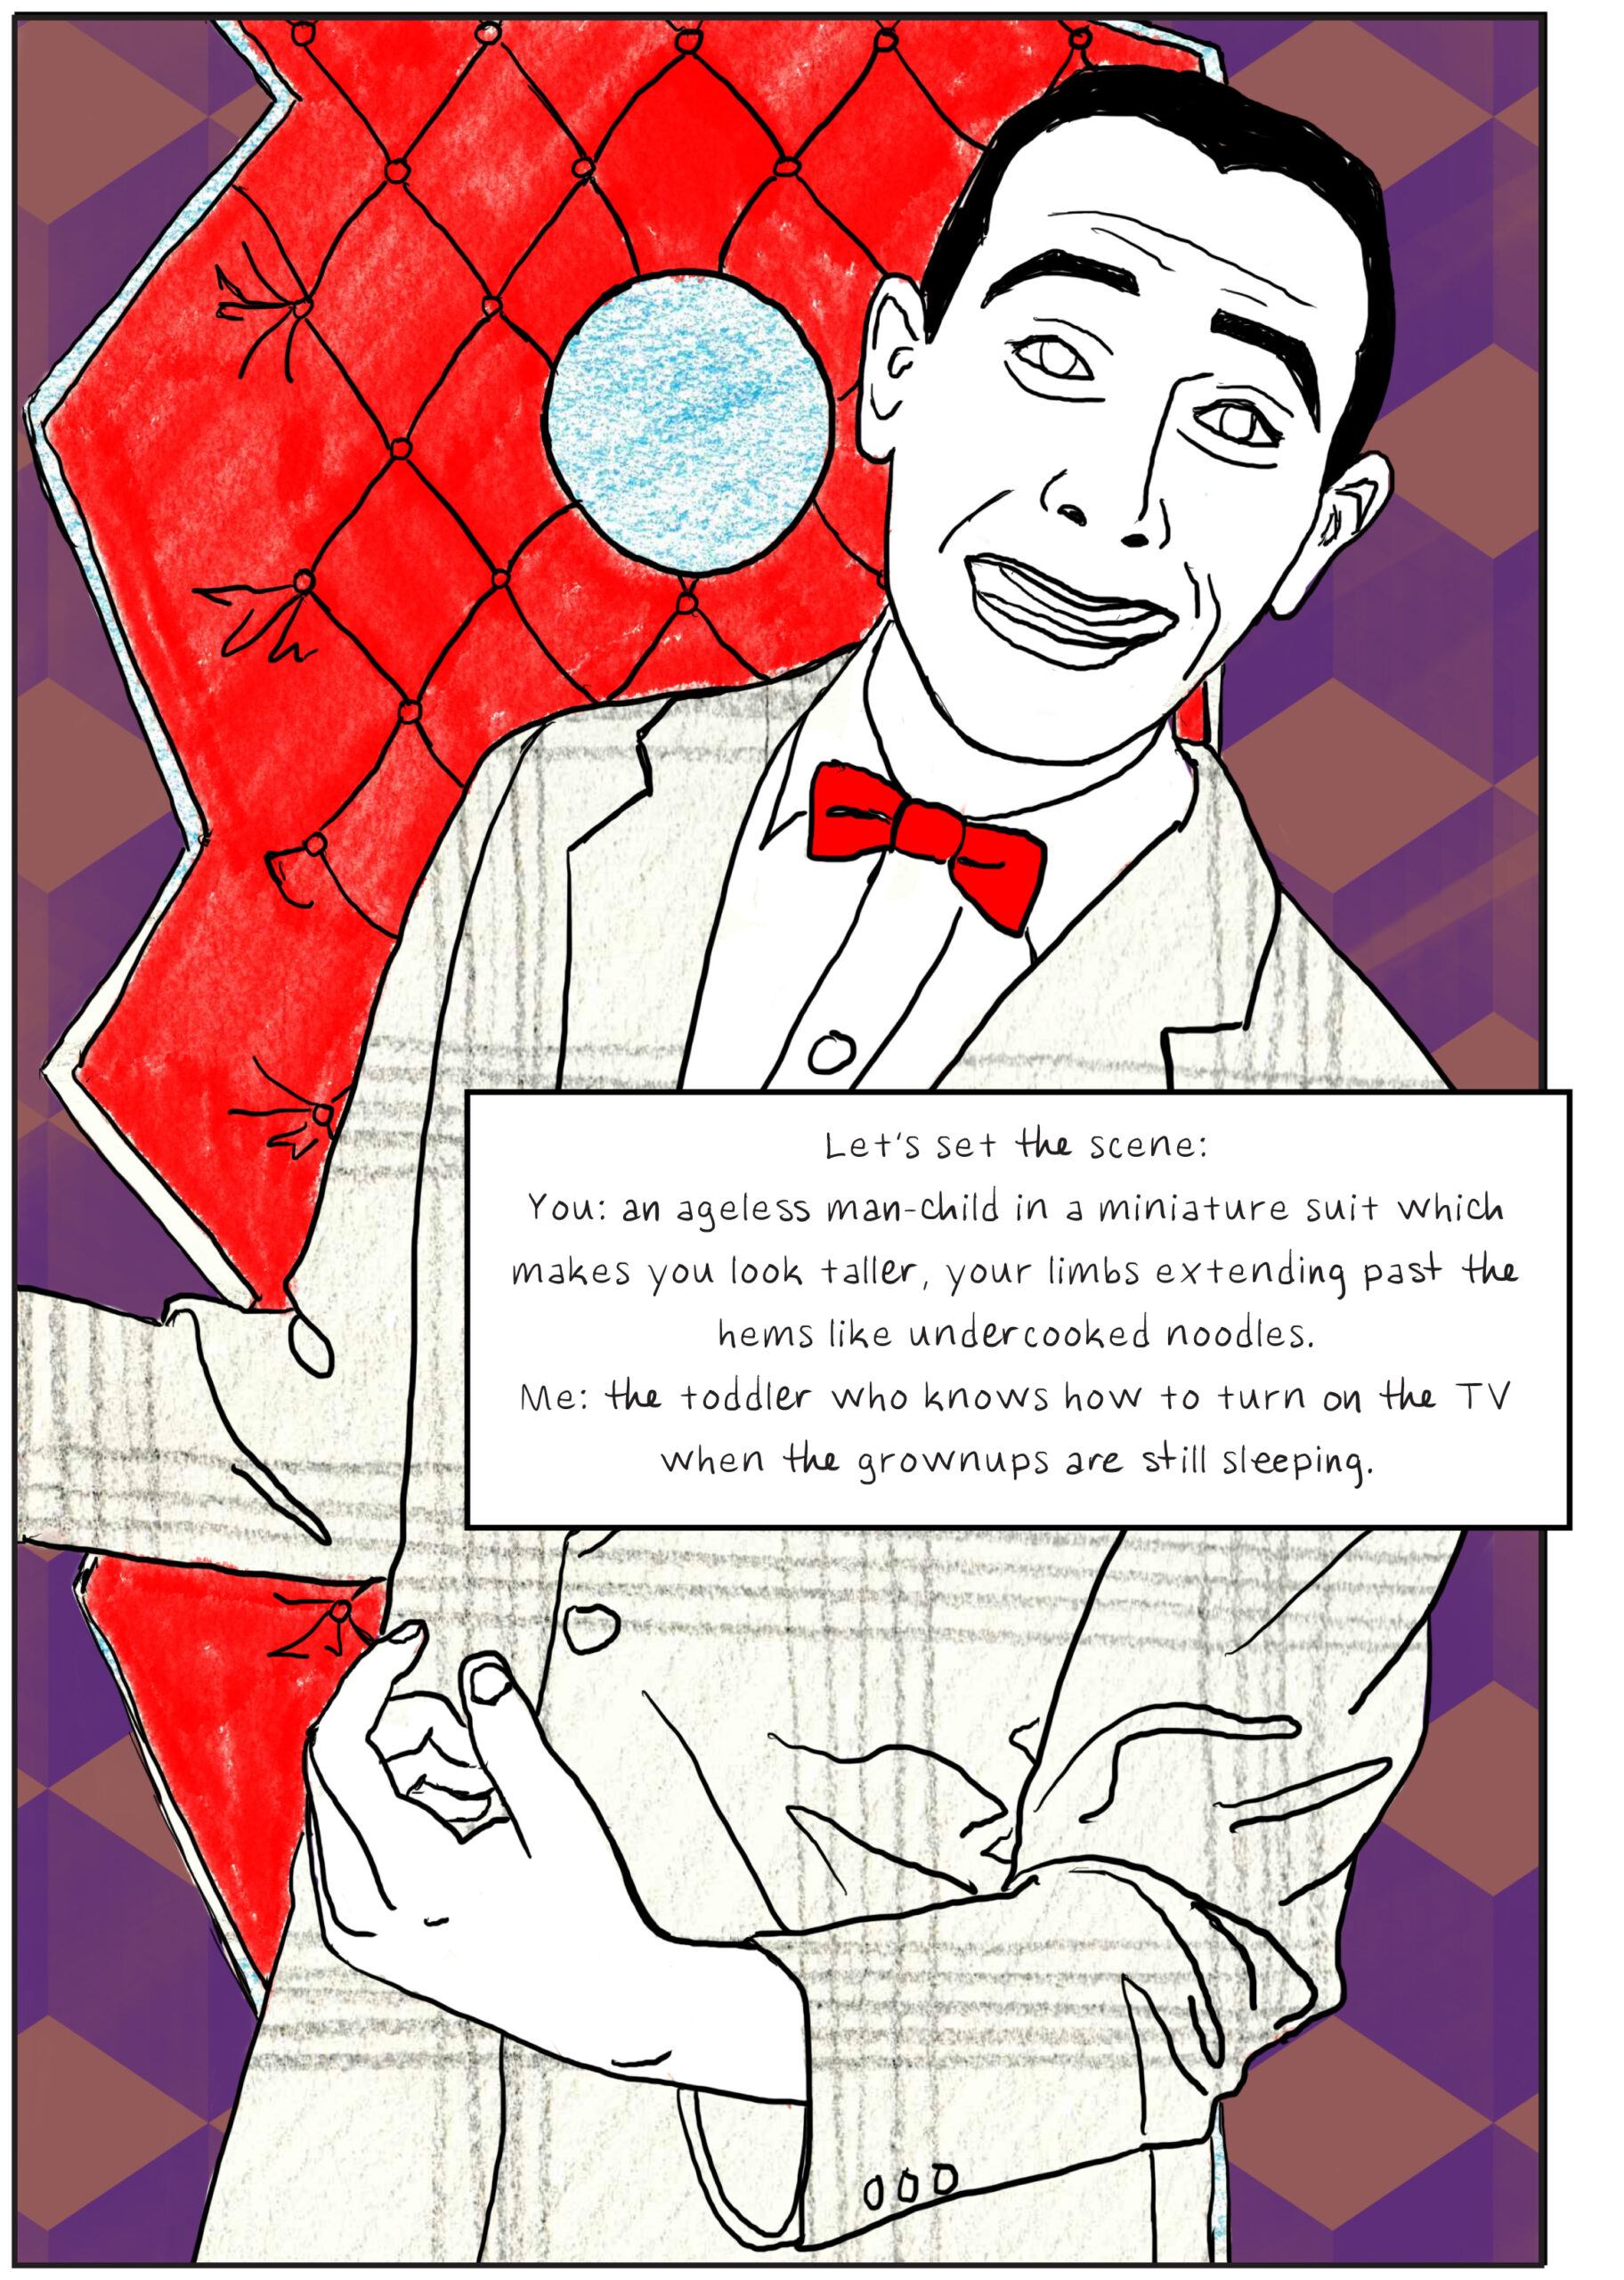 A hand-drawn portrait of Pee-wee Herman in his playhouse, smiling in front of his front door, which is bright red and matches his bowtie exactly. Text: Let’s set the scene: You: an ageless man-child in a miniature suit which makes you look taller, your limbs extending past the hems like undercooked noodles. Me: the toddler who knows how to turn on the TV when the grownups are still sleeping.